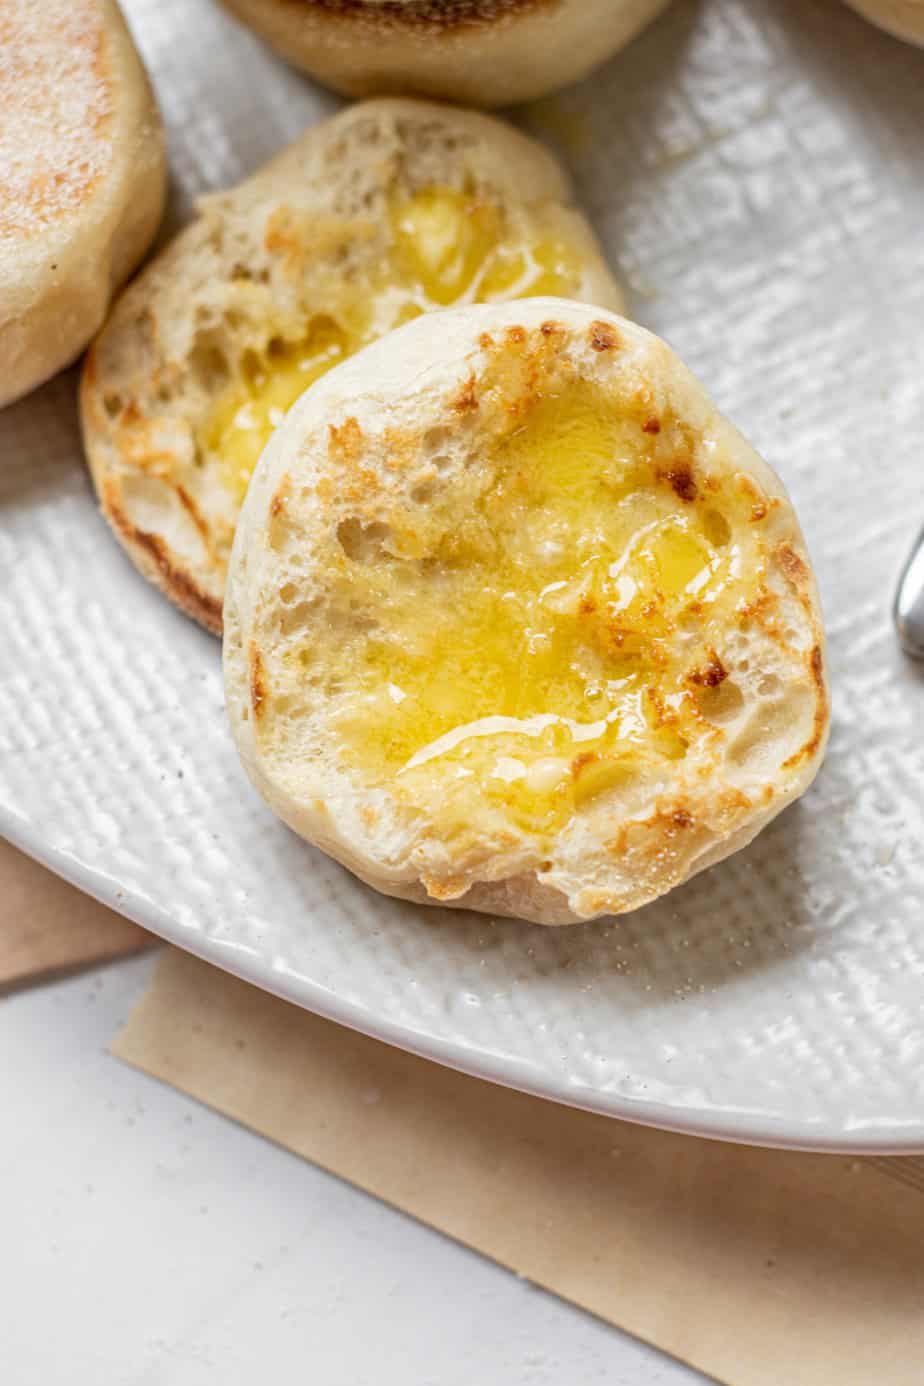 a buttered English muffin.